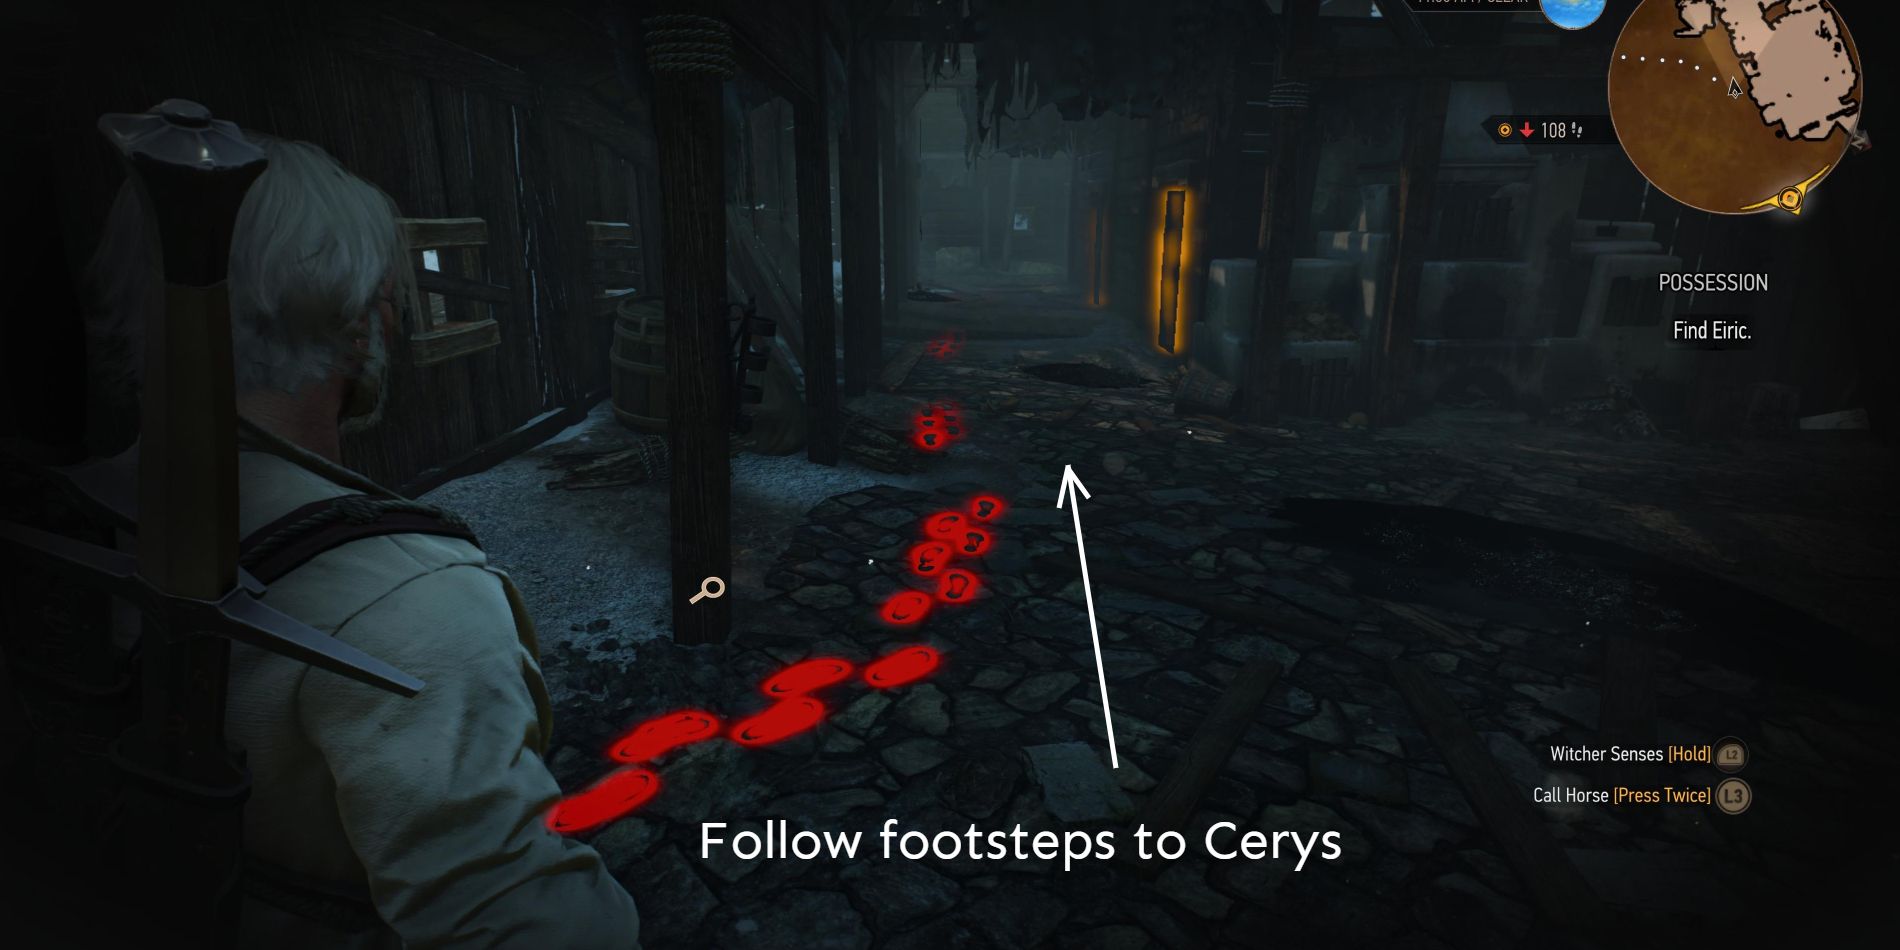 Witcher-3-Possession-Footprints